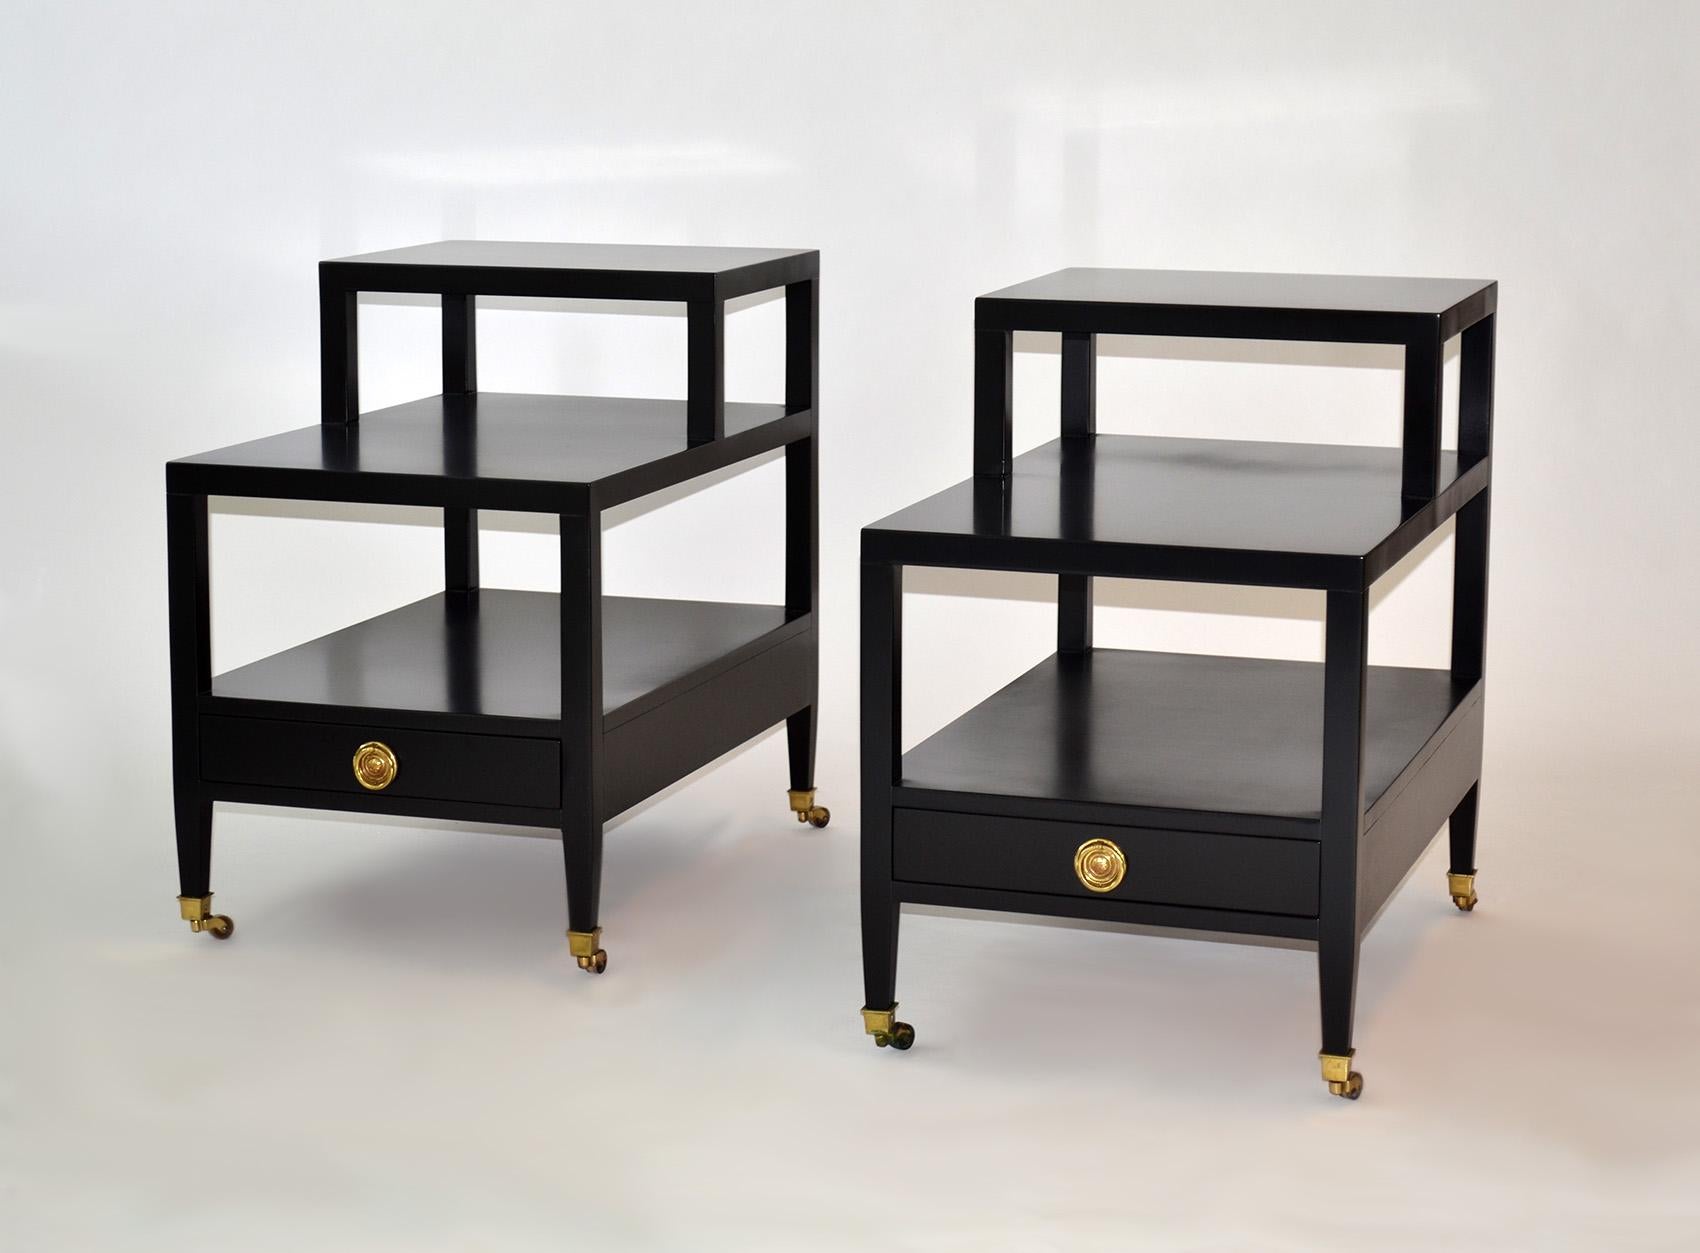 Pair of tiered end or side tables single drawer by Baker Furniture Mid-Century.
Rare pair of end or side tiered tables single drawer black by Baker Mid-Century.
Black lacquered wood with brass pulls, sabots and wheels (one wheel is stuck).